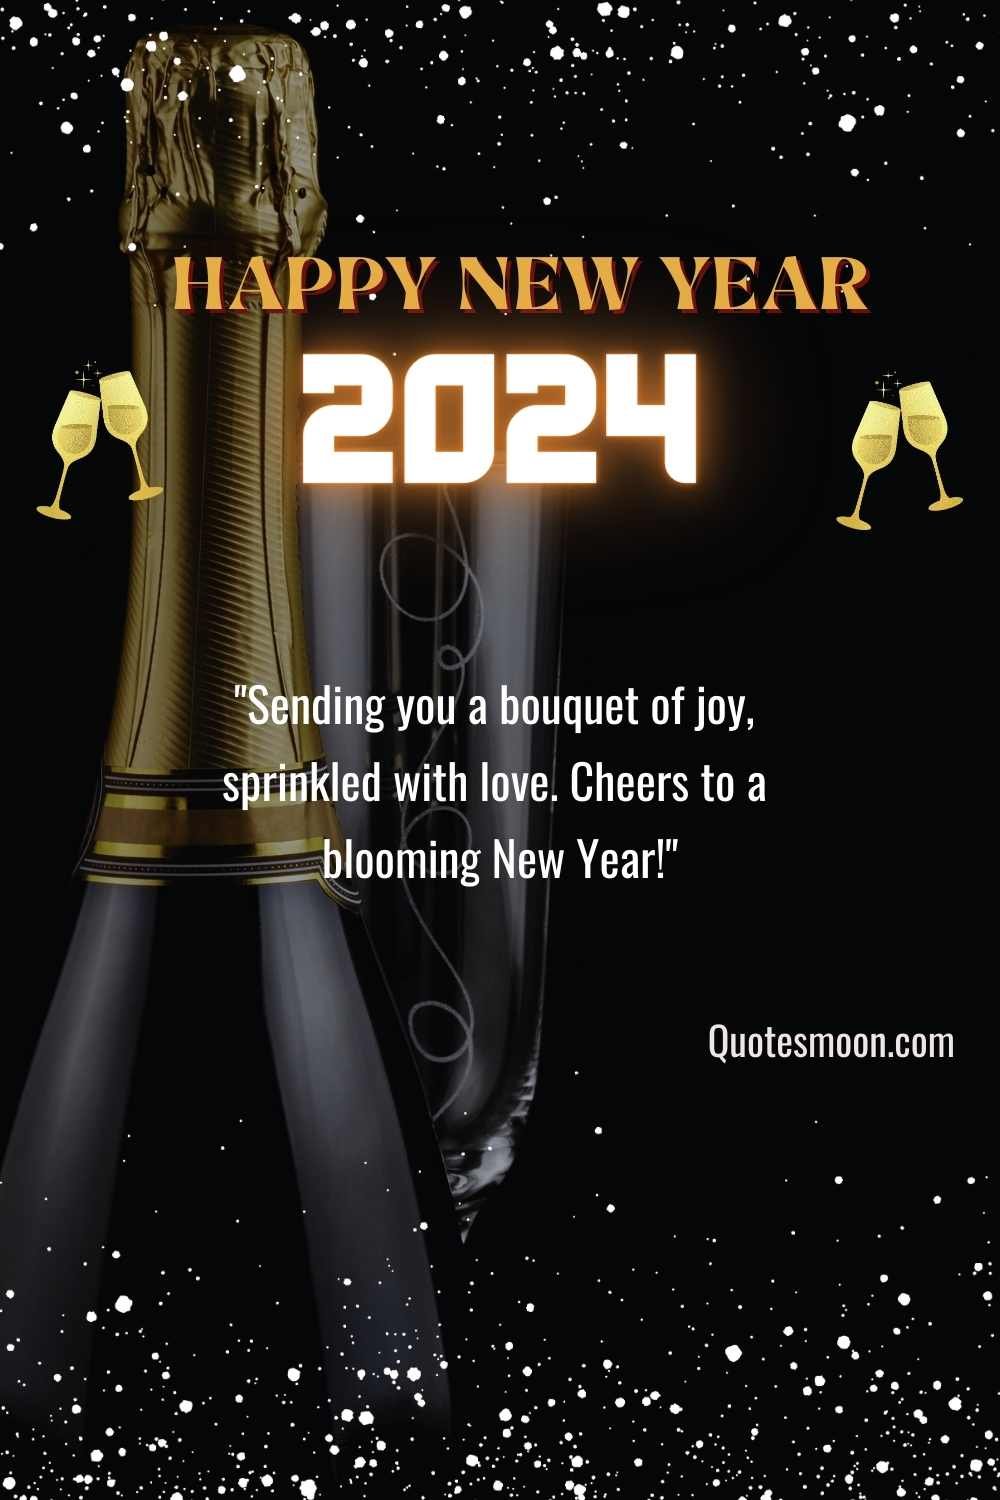  success and prosperity wishes in 2024 with images HD